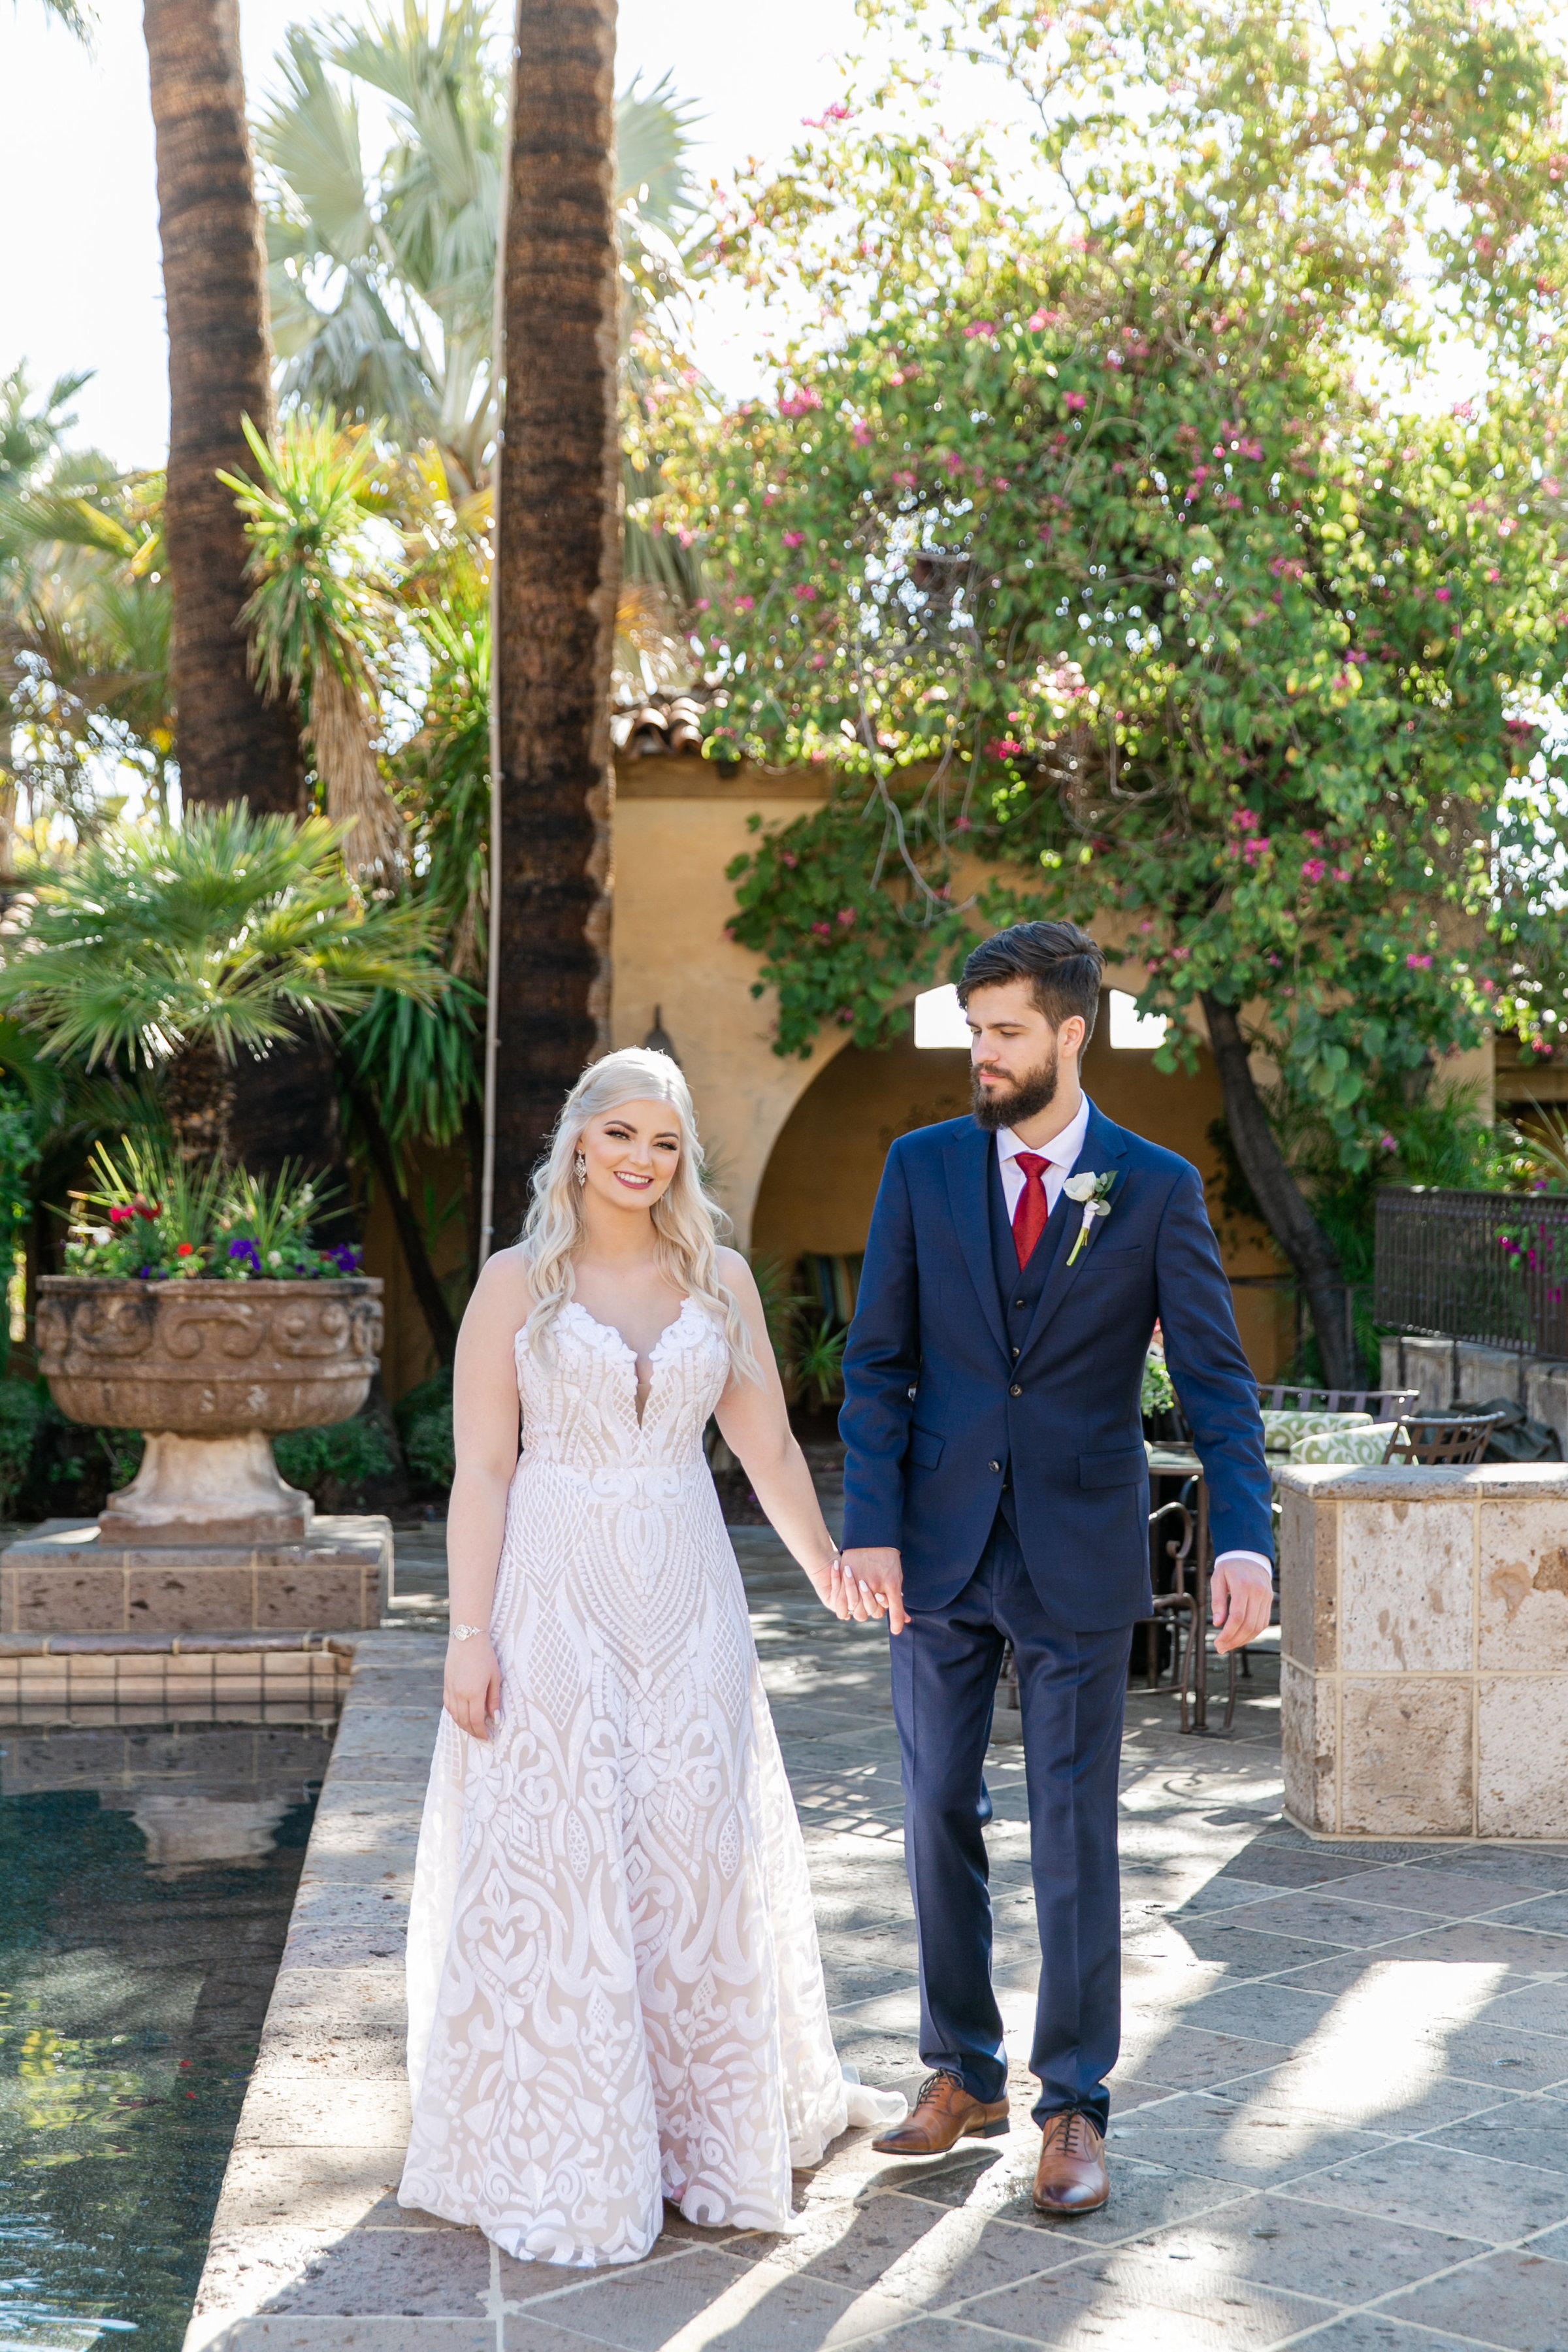 Karlie Colleen Photography - The Royal Palms Wedding - Some Like It Classic - Alex & Sam-130